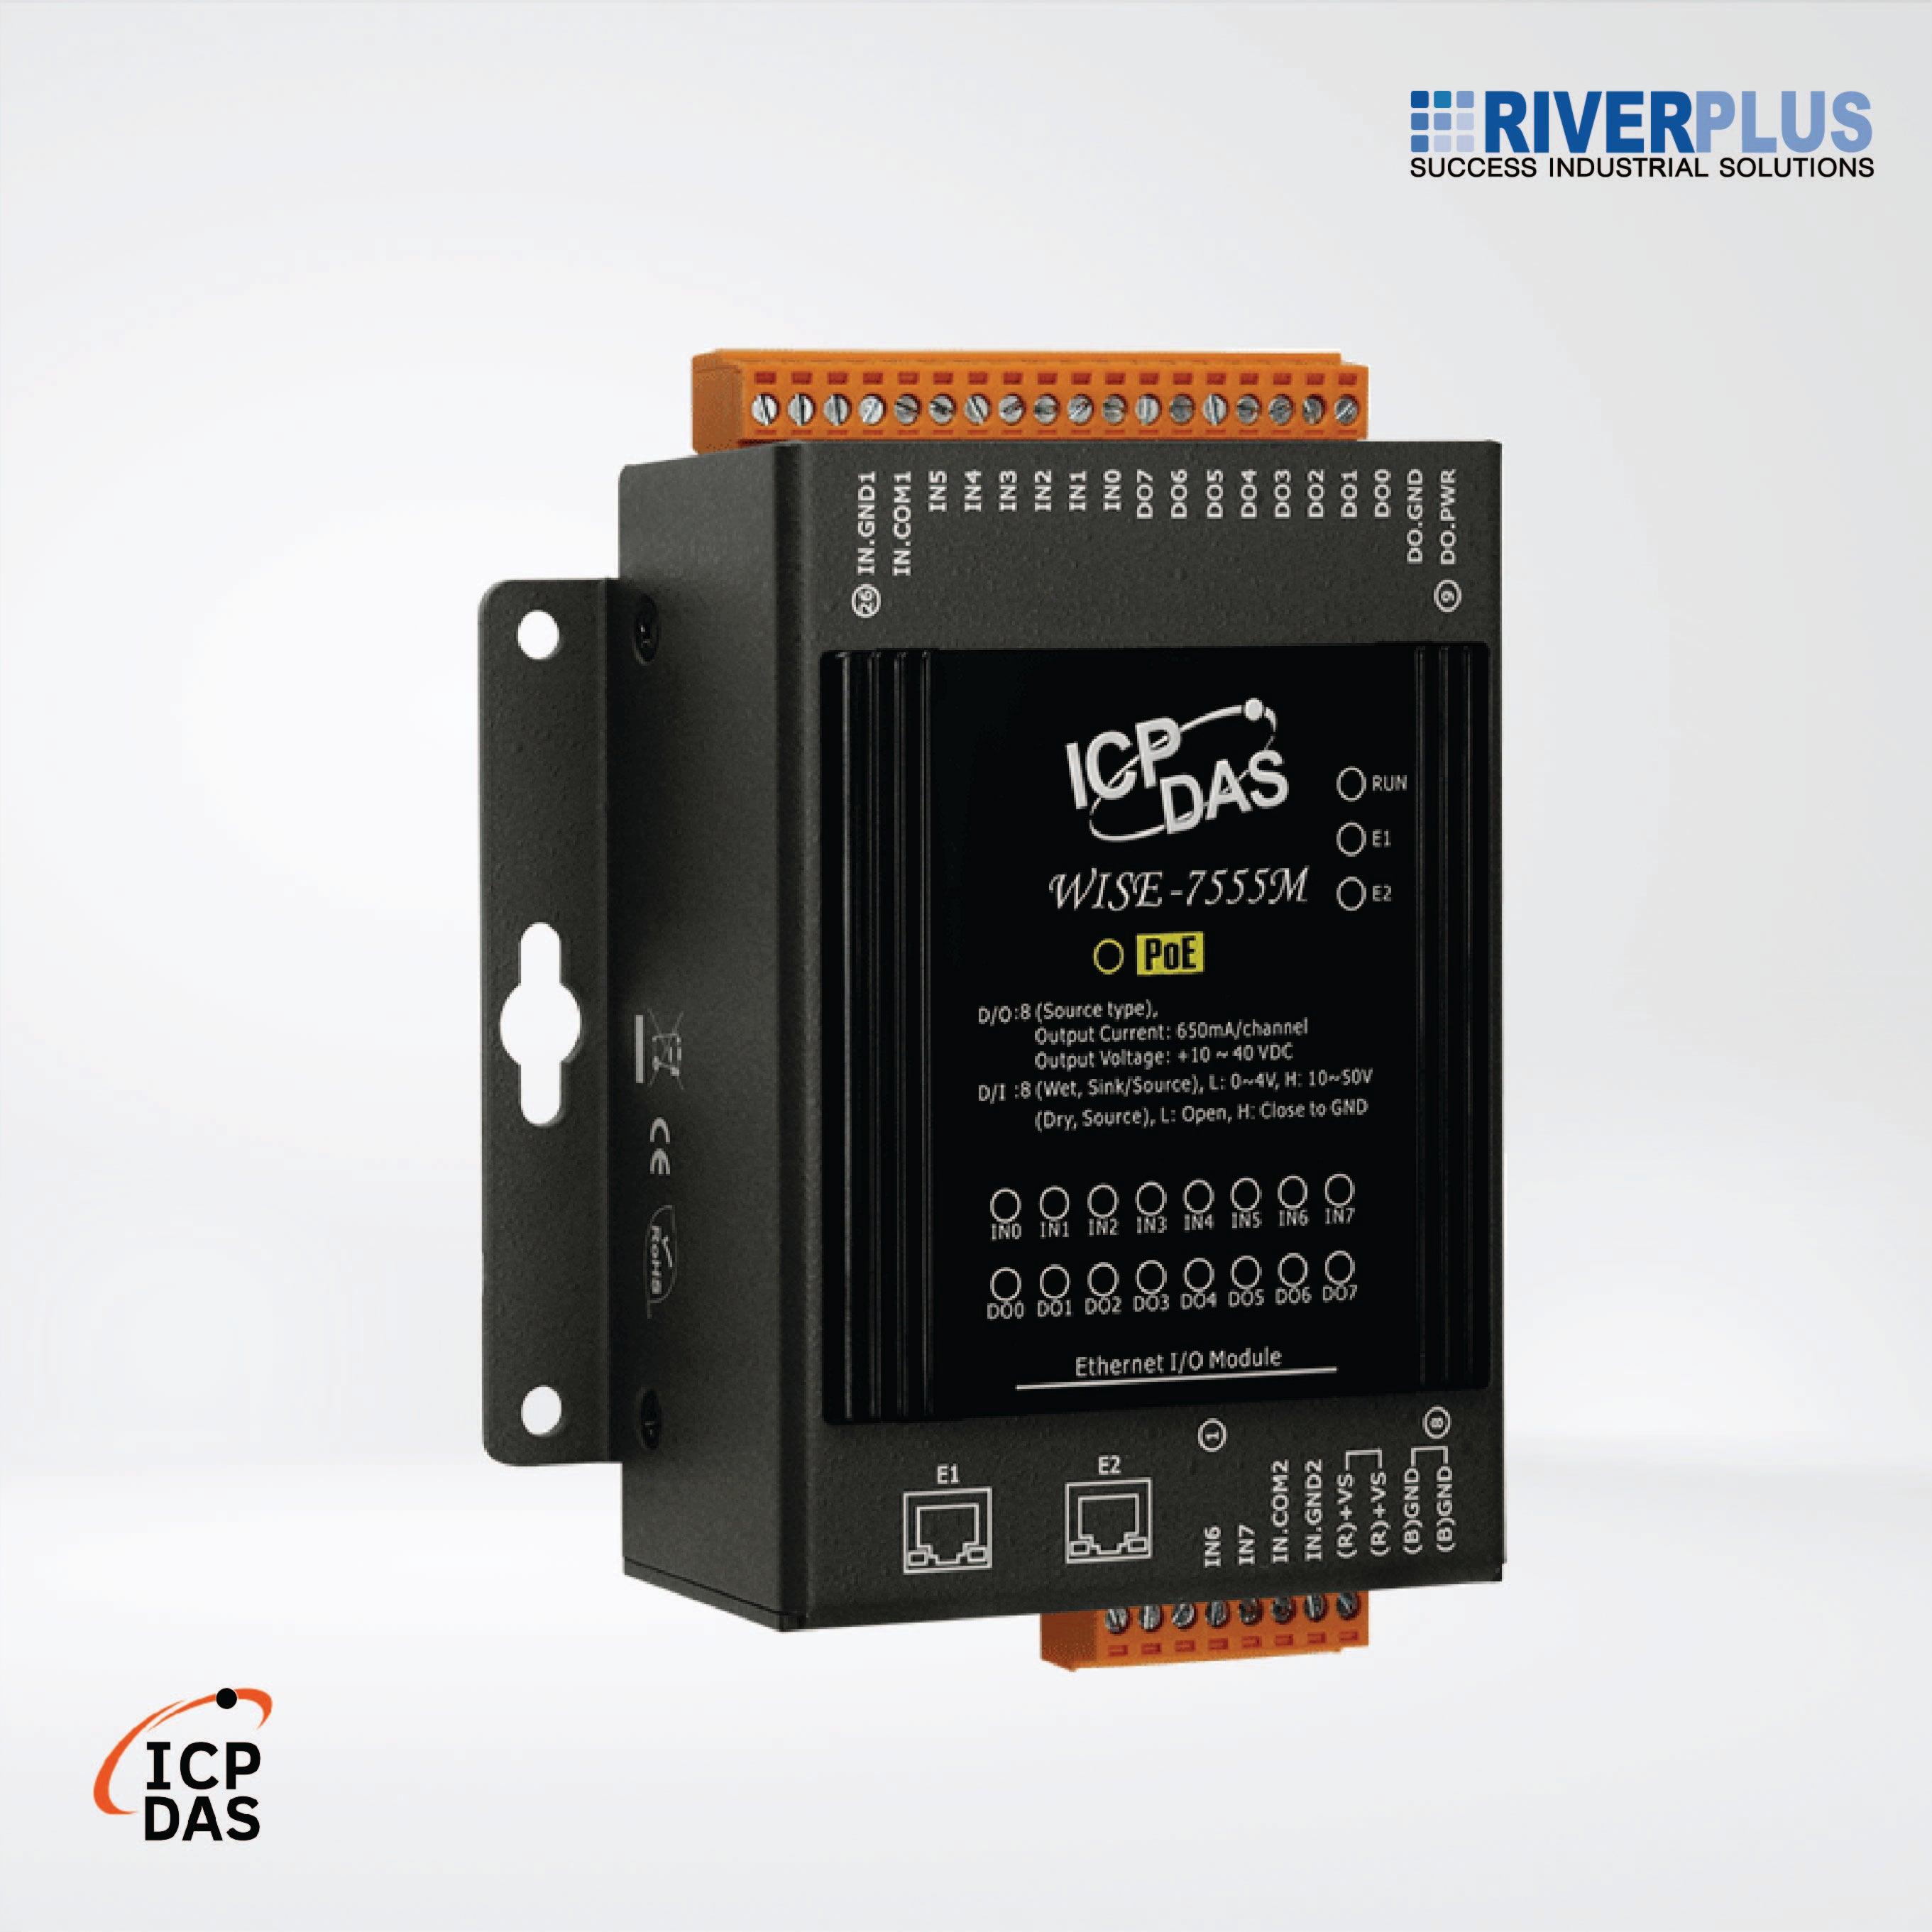 WISE-7555M Intelligent MQTT I/O Module with 8-ch DI, 8-ch DO and 2-port Ethernet Switch - Riverplus